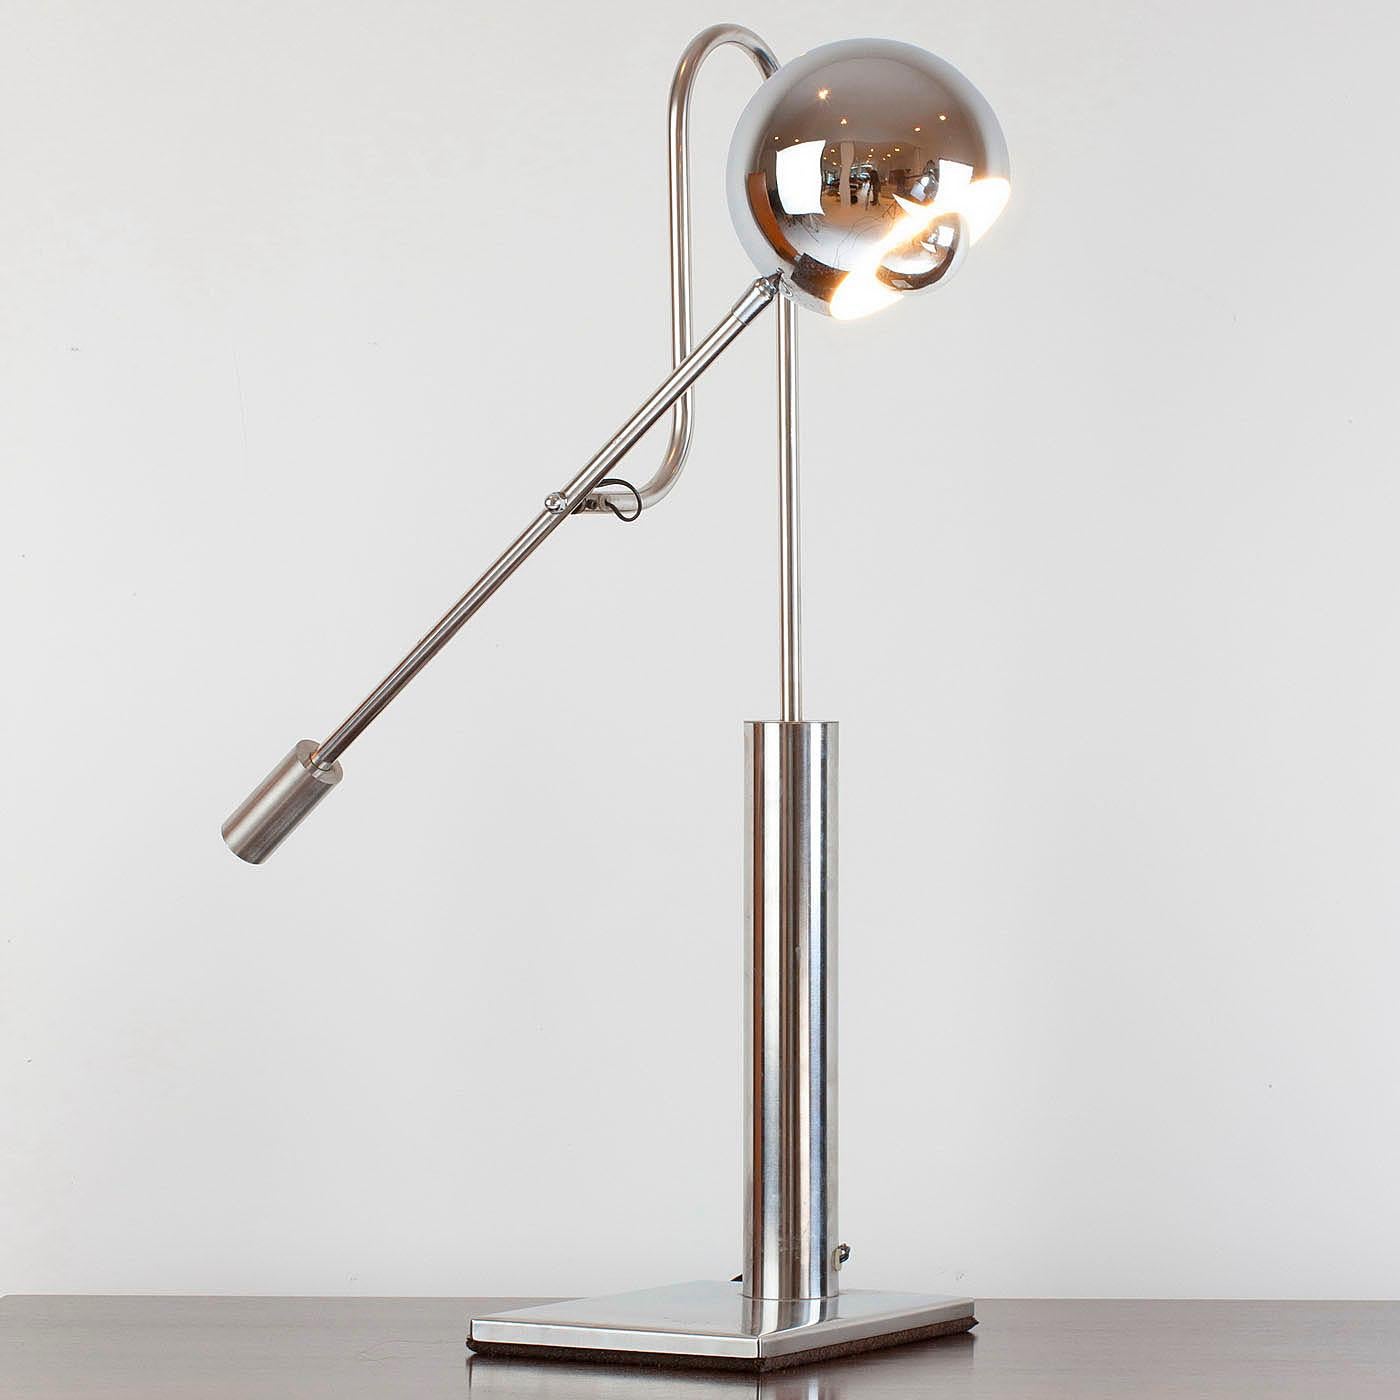 Fine quality, elegant table lamp by J Bouvier, Paris. Signed. The shade can be oriented in different directions and arm moved up and down. Due to its scale it fits well on a large imposing desk and is practicle yet elegant.